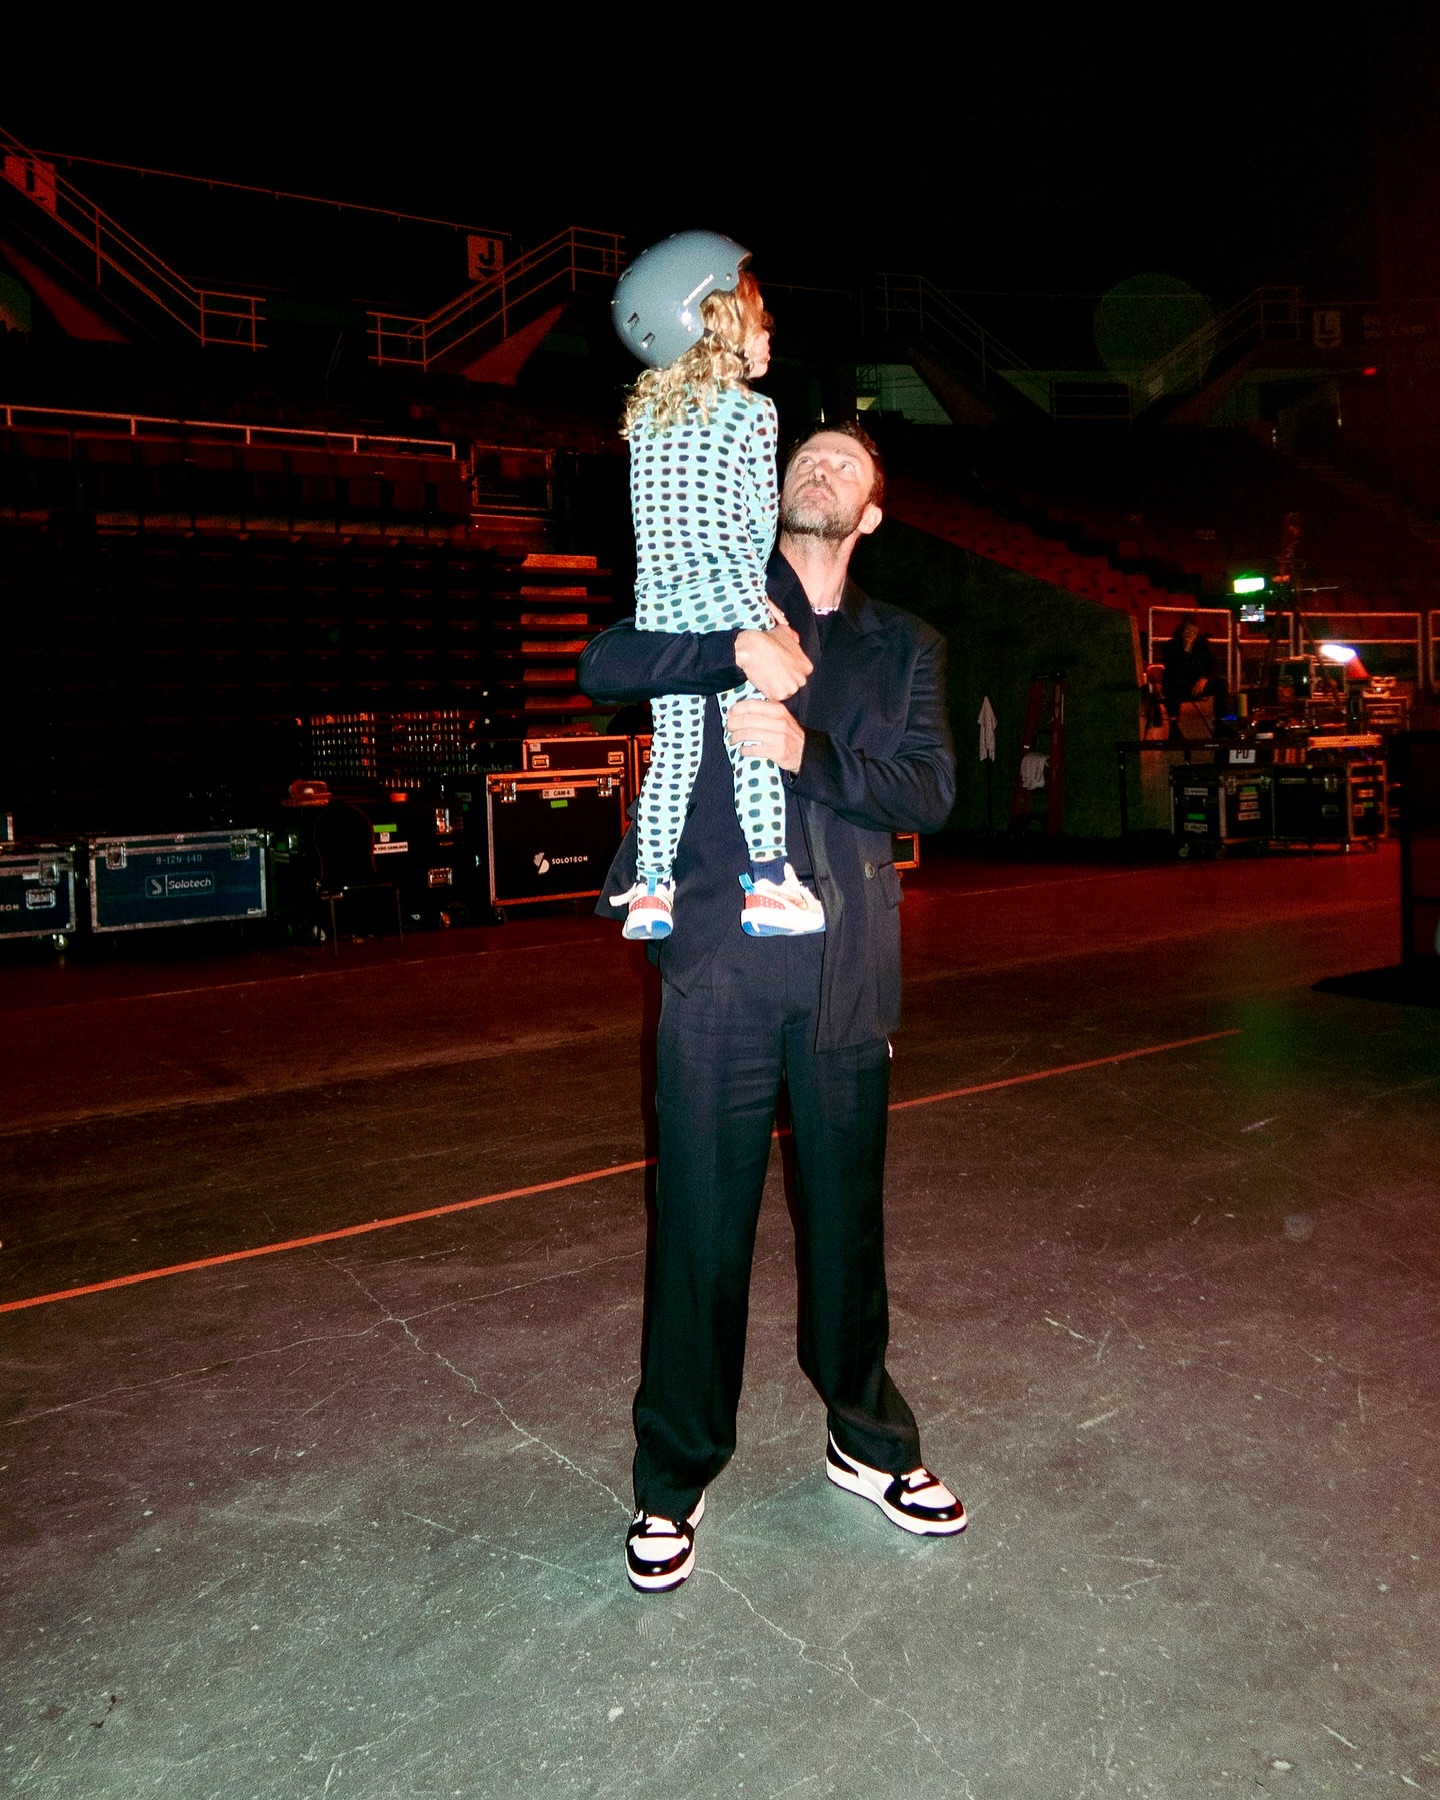 Justin Timberlake with Phineas.